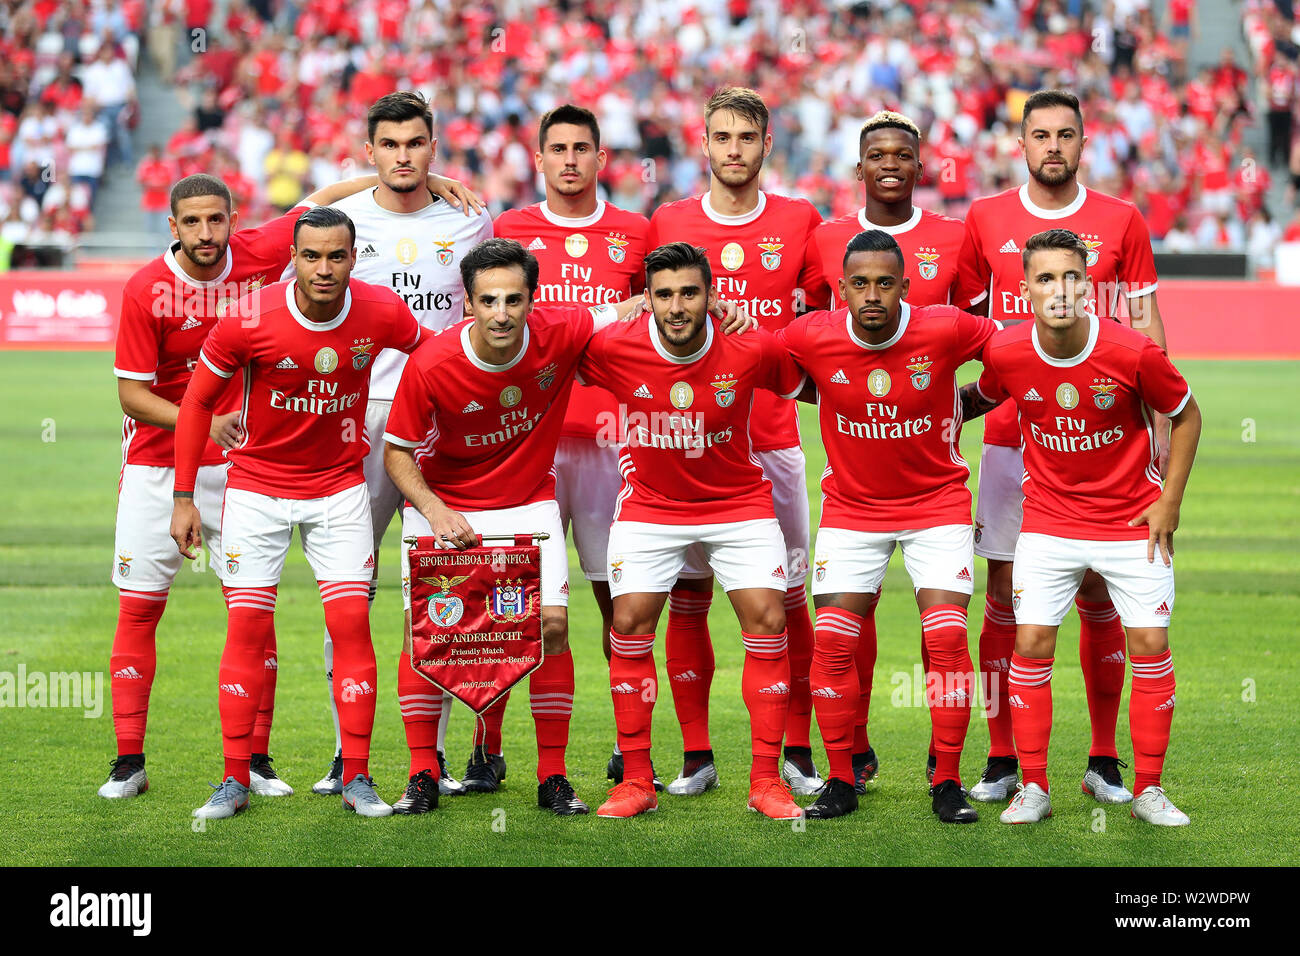 Lisbon Portugal 10th July 2019 Benfica S Players Pose Before A Pre Season Friendly Football Match Between Sl Benfica And Rsc Anderlecht In Lisbon Portugal On July 10 2019 Anderlecht Won 2 1 Credit Pedro [ 956 x 1300 Pixel ]